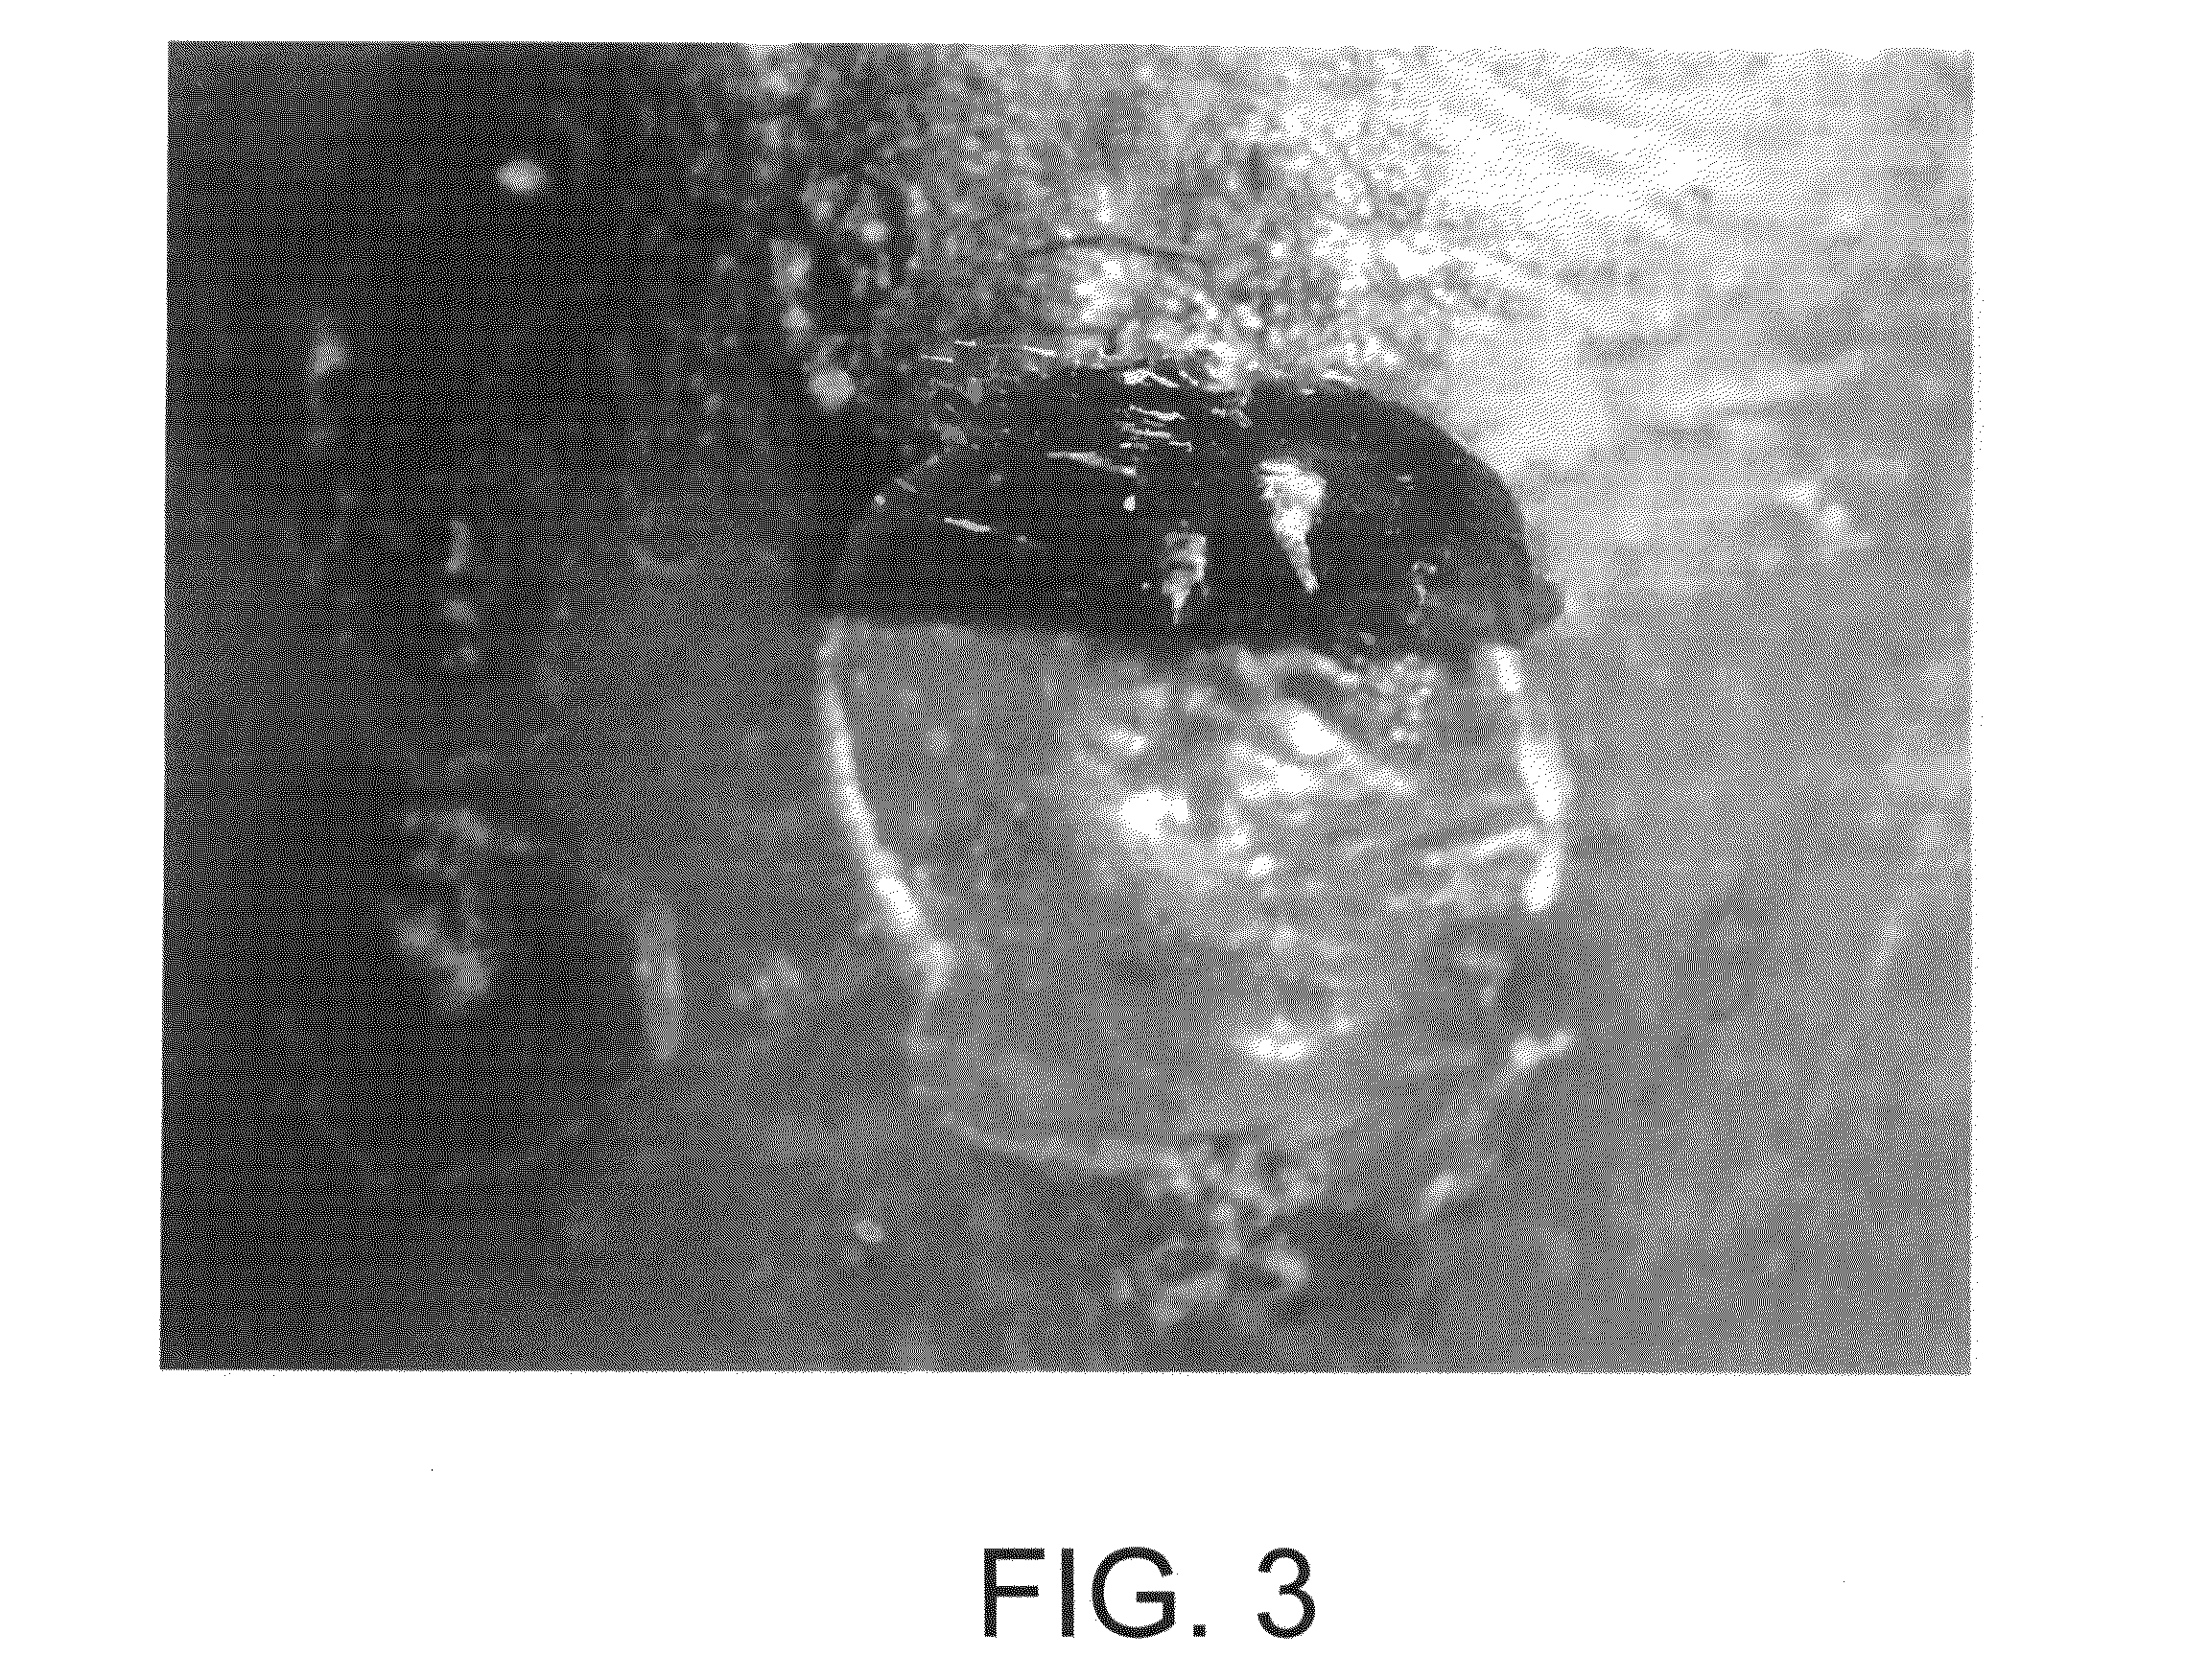 Method of treating acquired perforating dermatosis with cantharidin